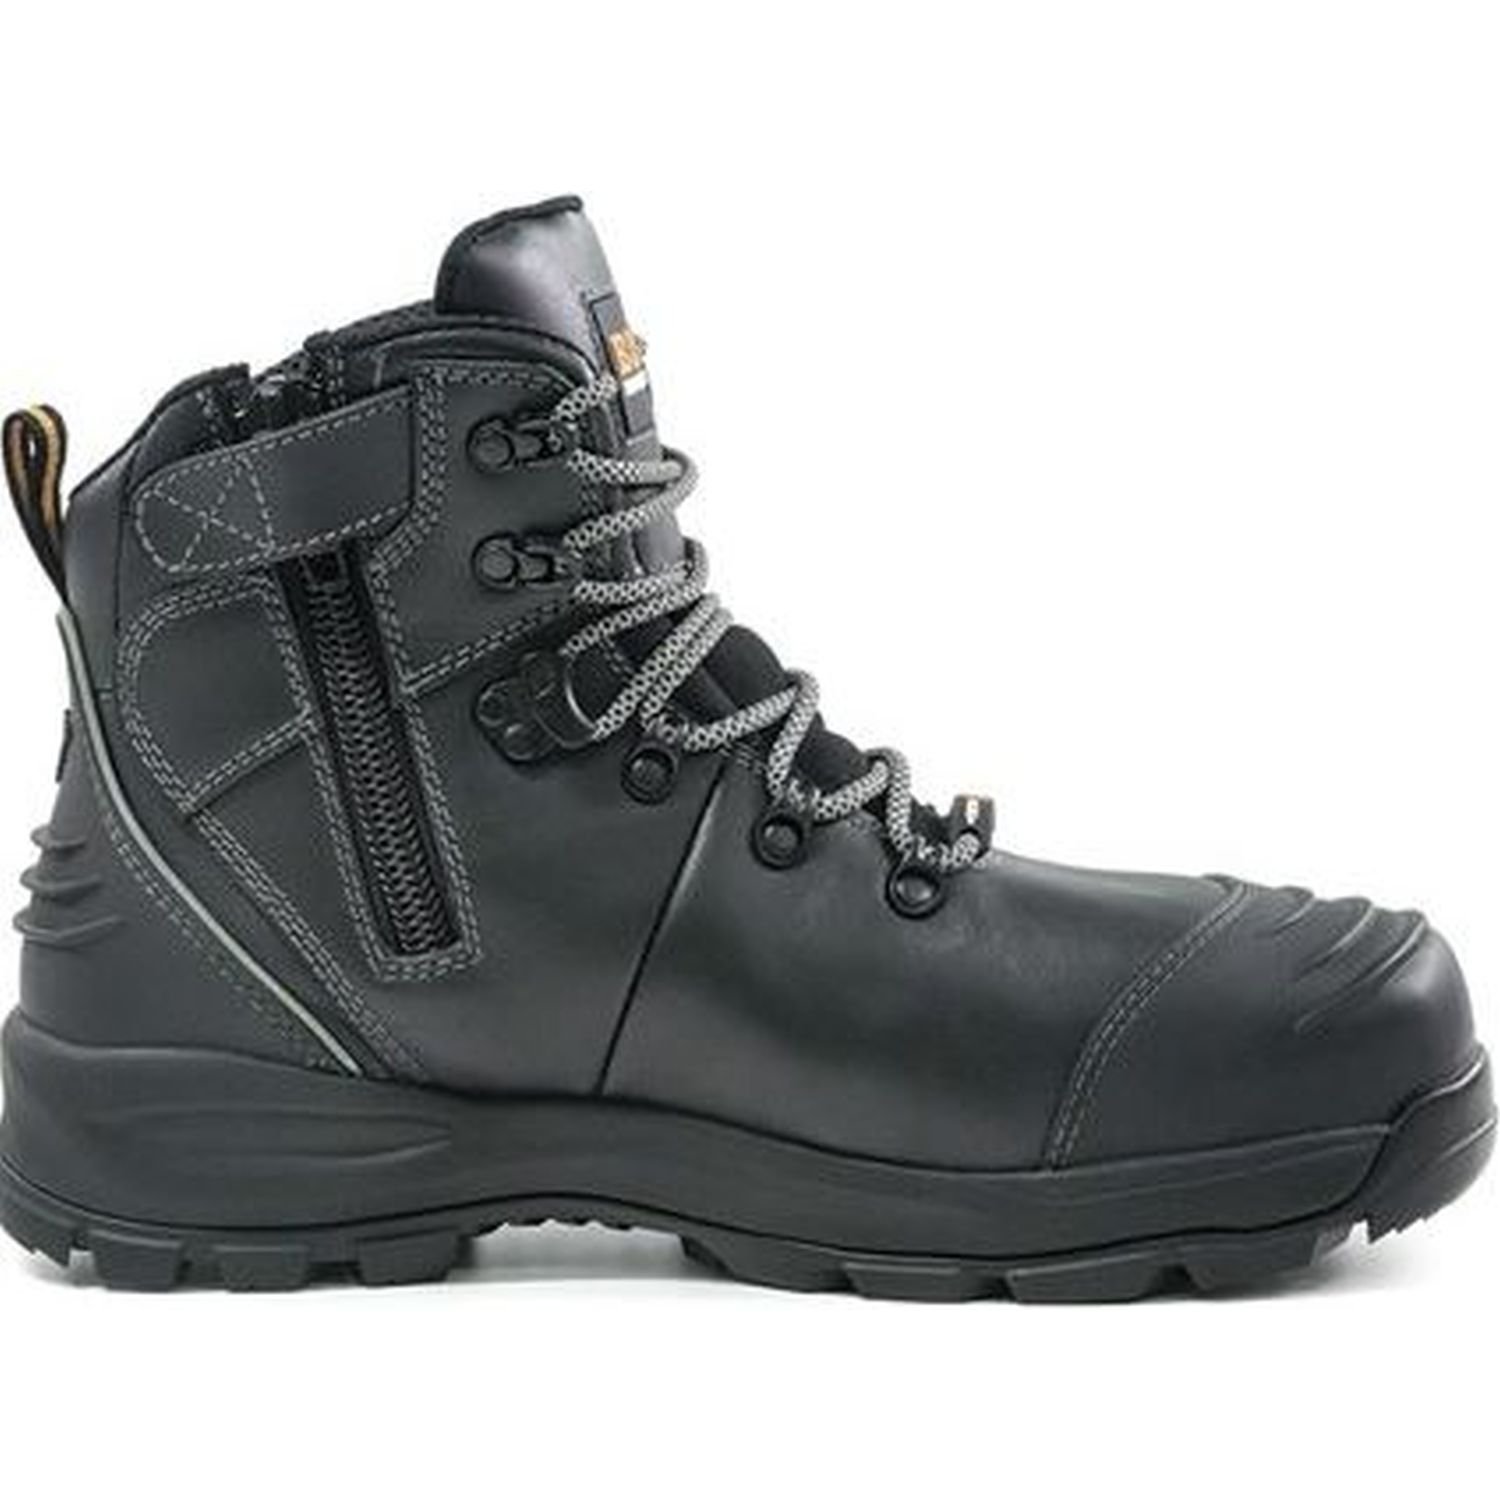 Bison Extreme Ankle Lace Up/Zip Anti-Pen EH Safety Boot with Scuff Cap